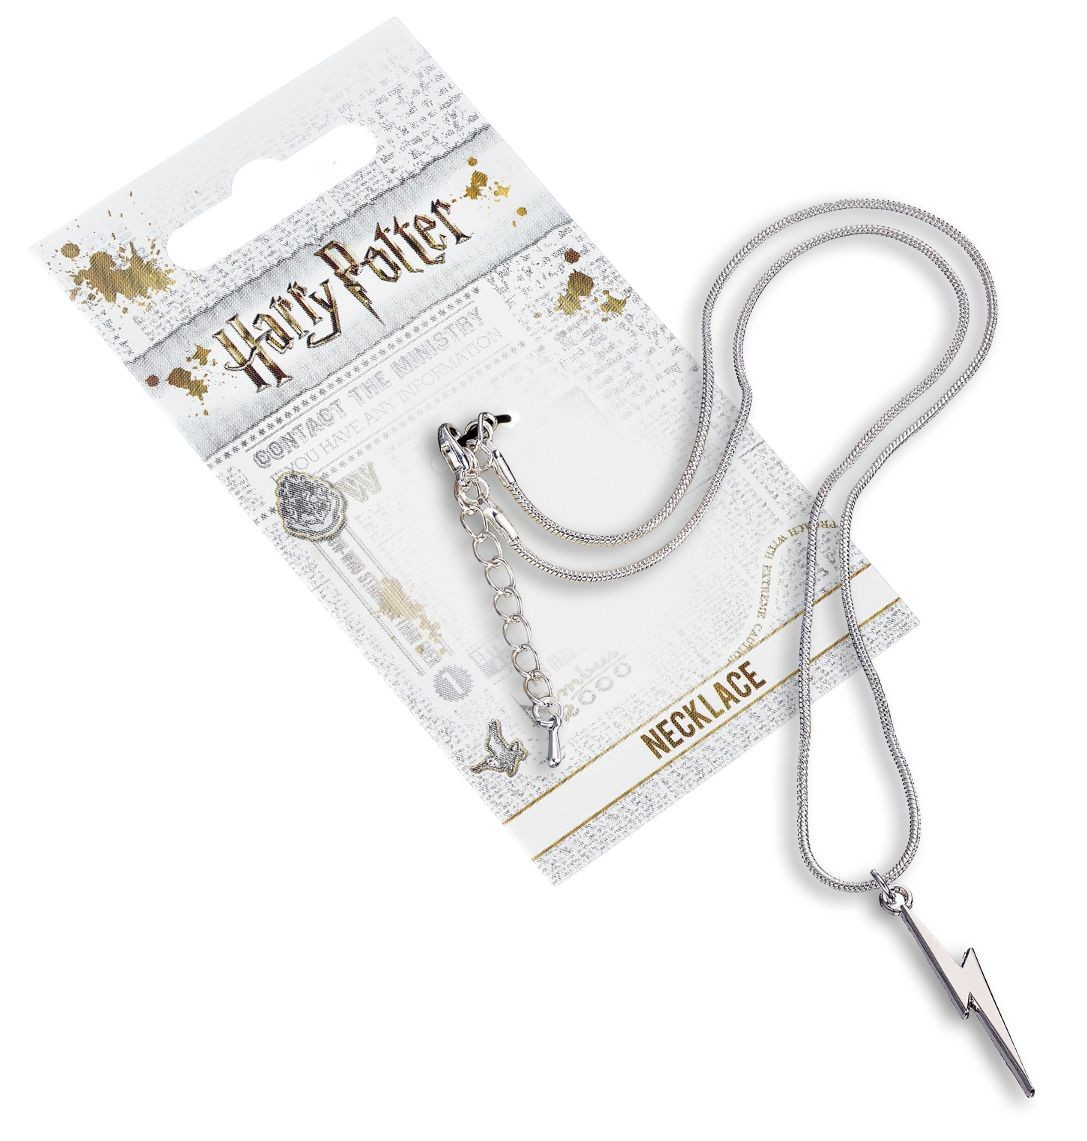 Collier personnage harry potter - collier bille avec figurine email